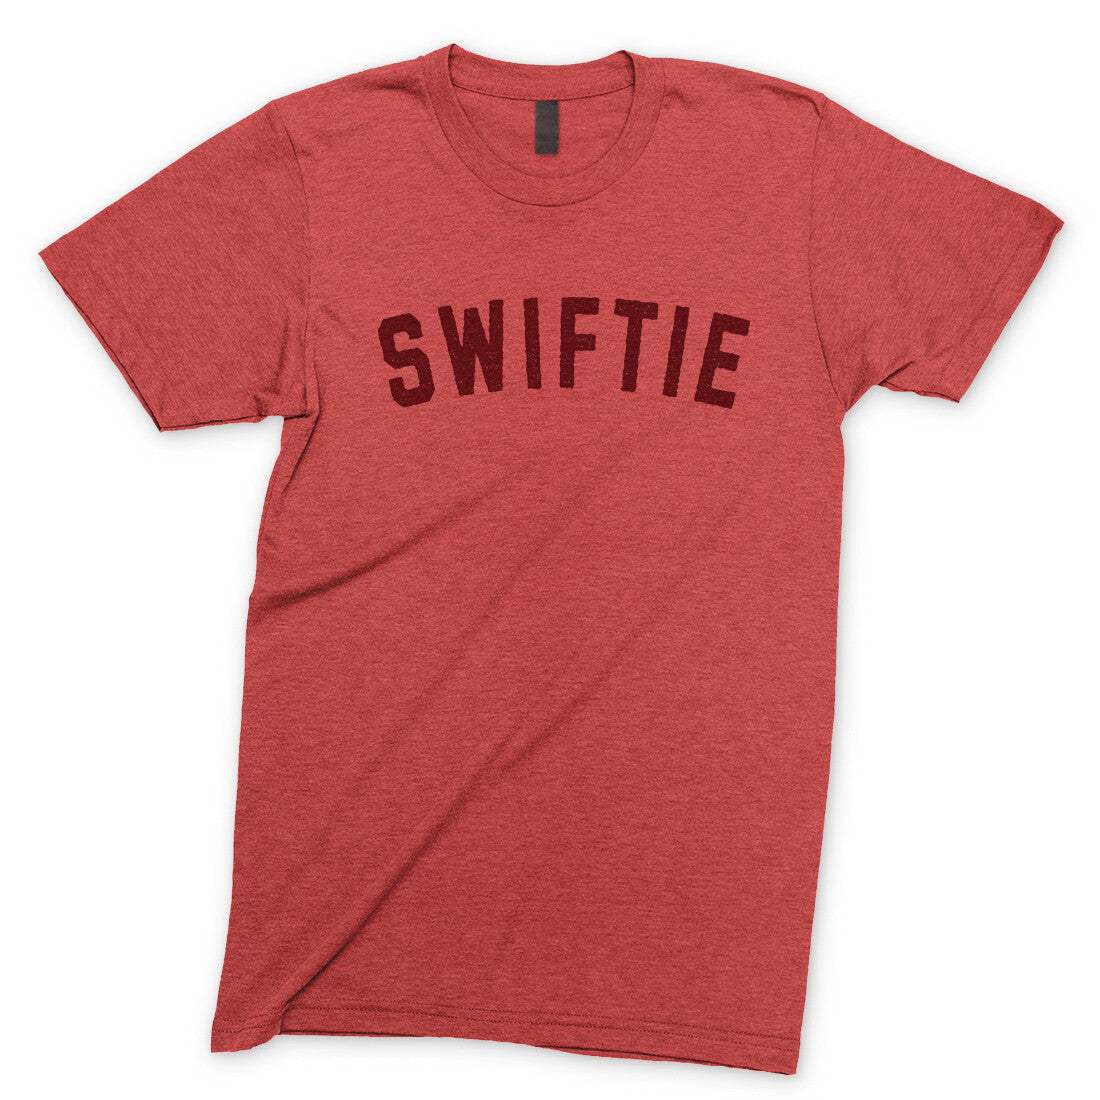 Swiftie in Heather Red Color